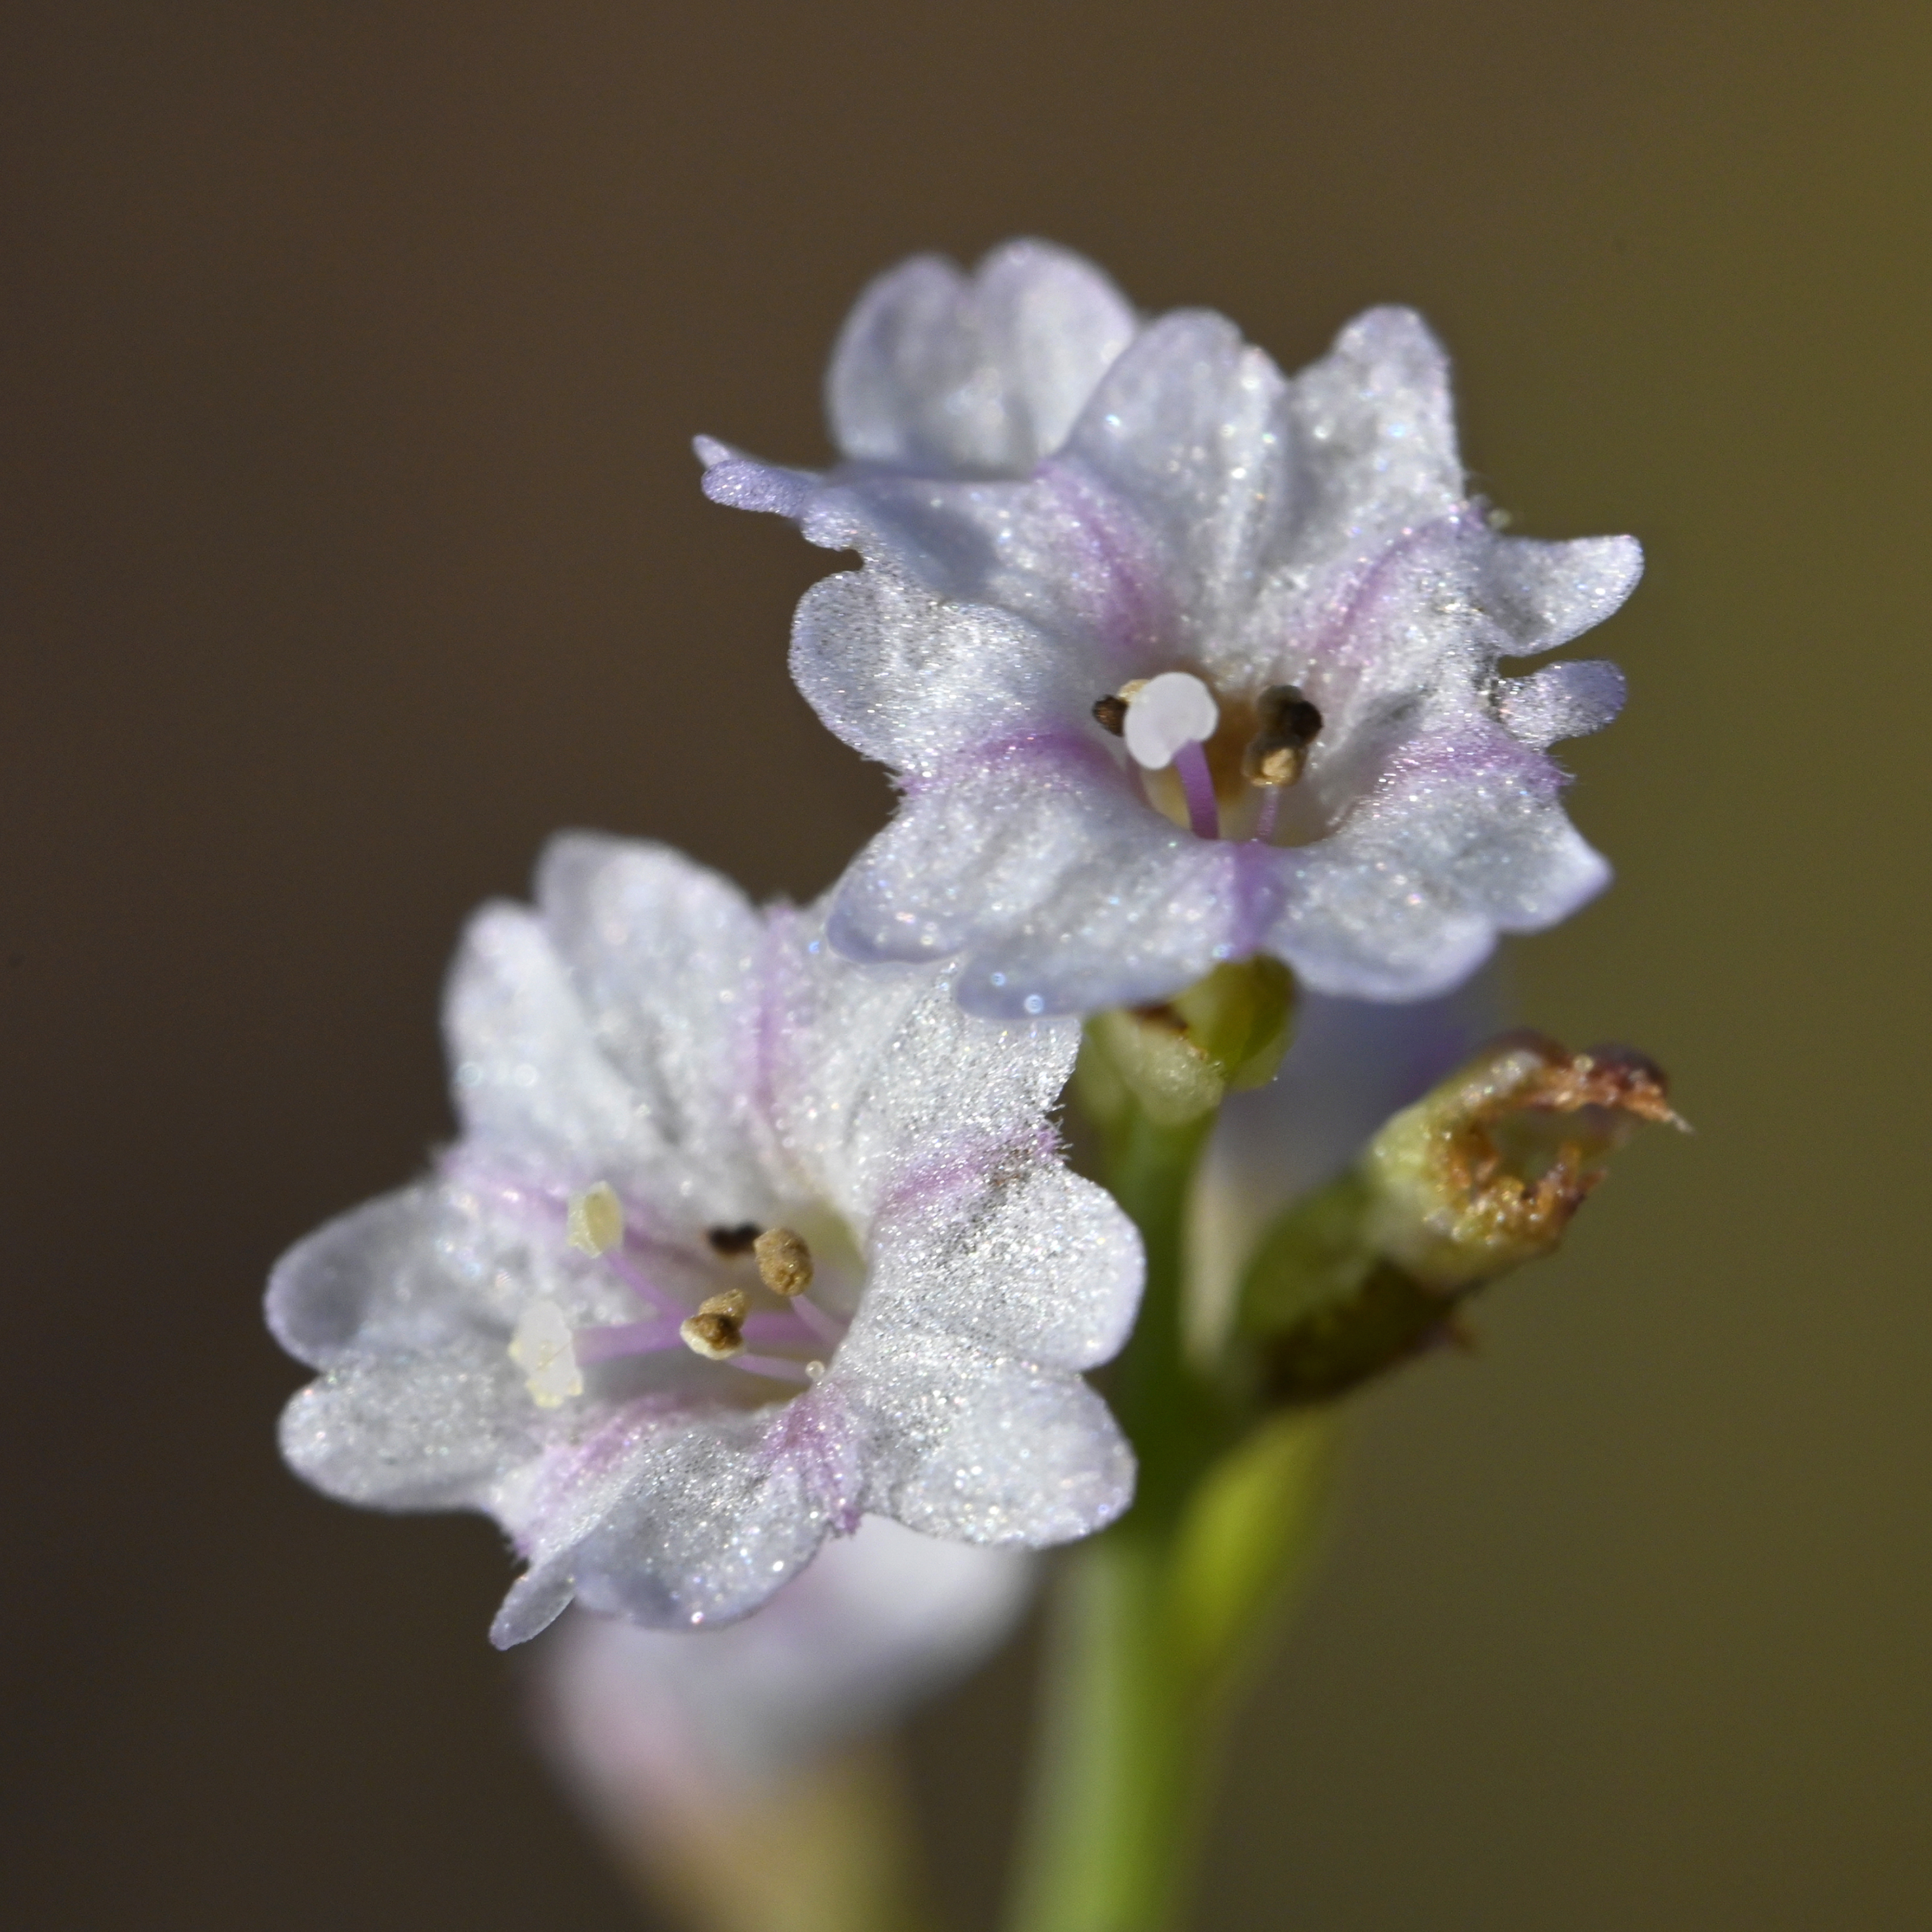 Photo by Jerry Bombardier  |  Tiny blossoms flourish in the desert landscape after heavy monsoon rains.